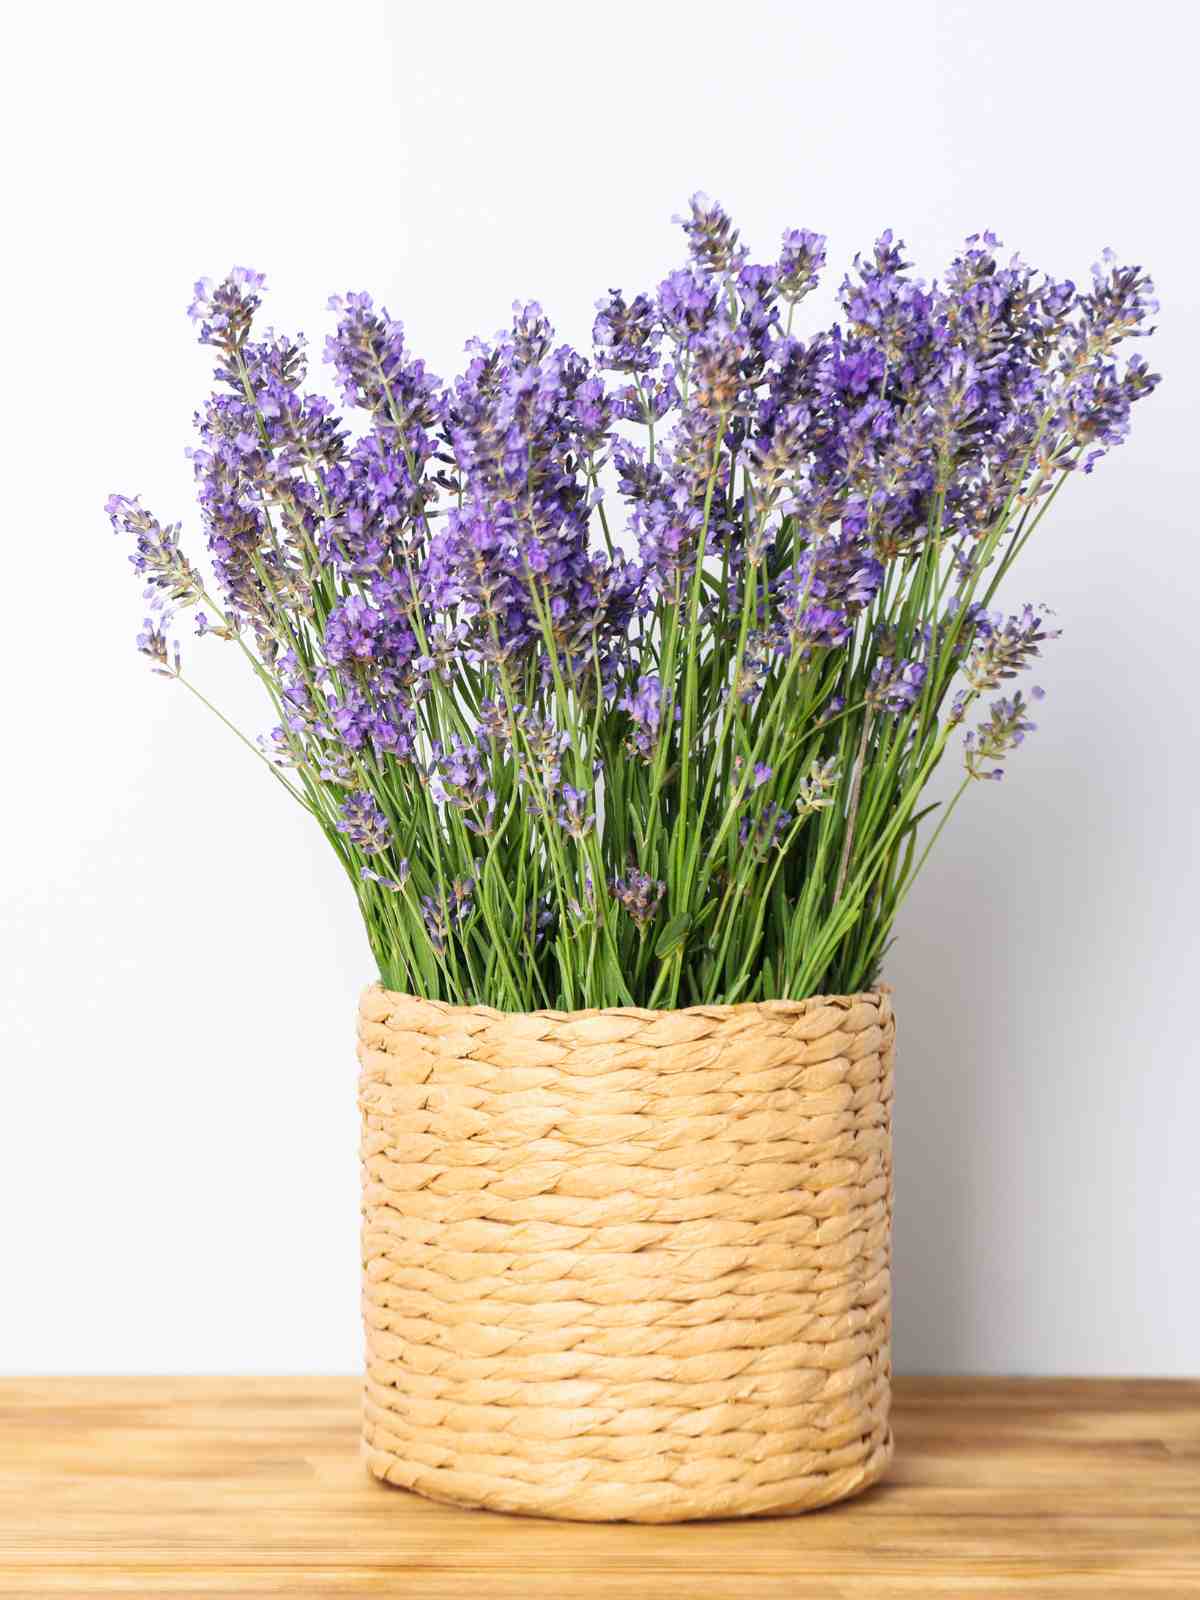 How to Grow and Care for Potted Lavender